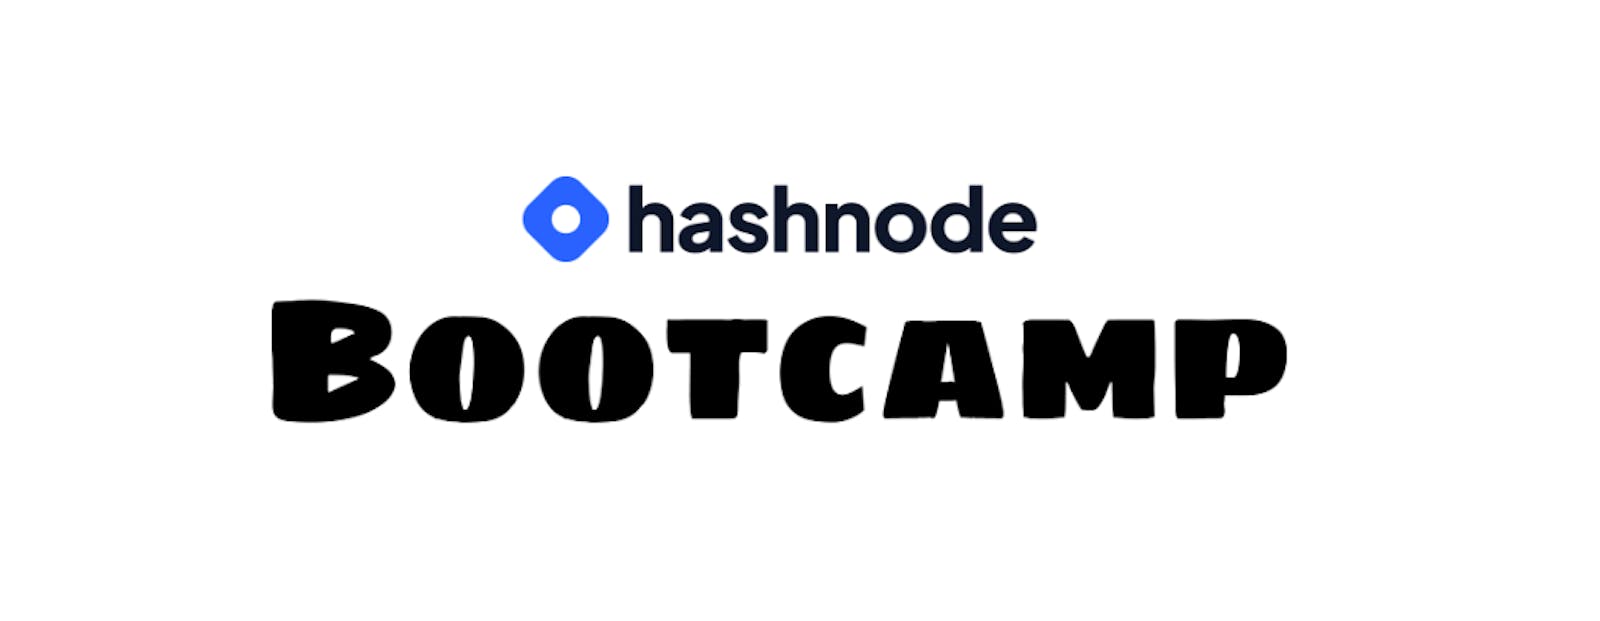 Day 1 of Hashnode Bootcamp: What I learnt✨